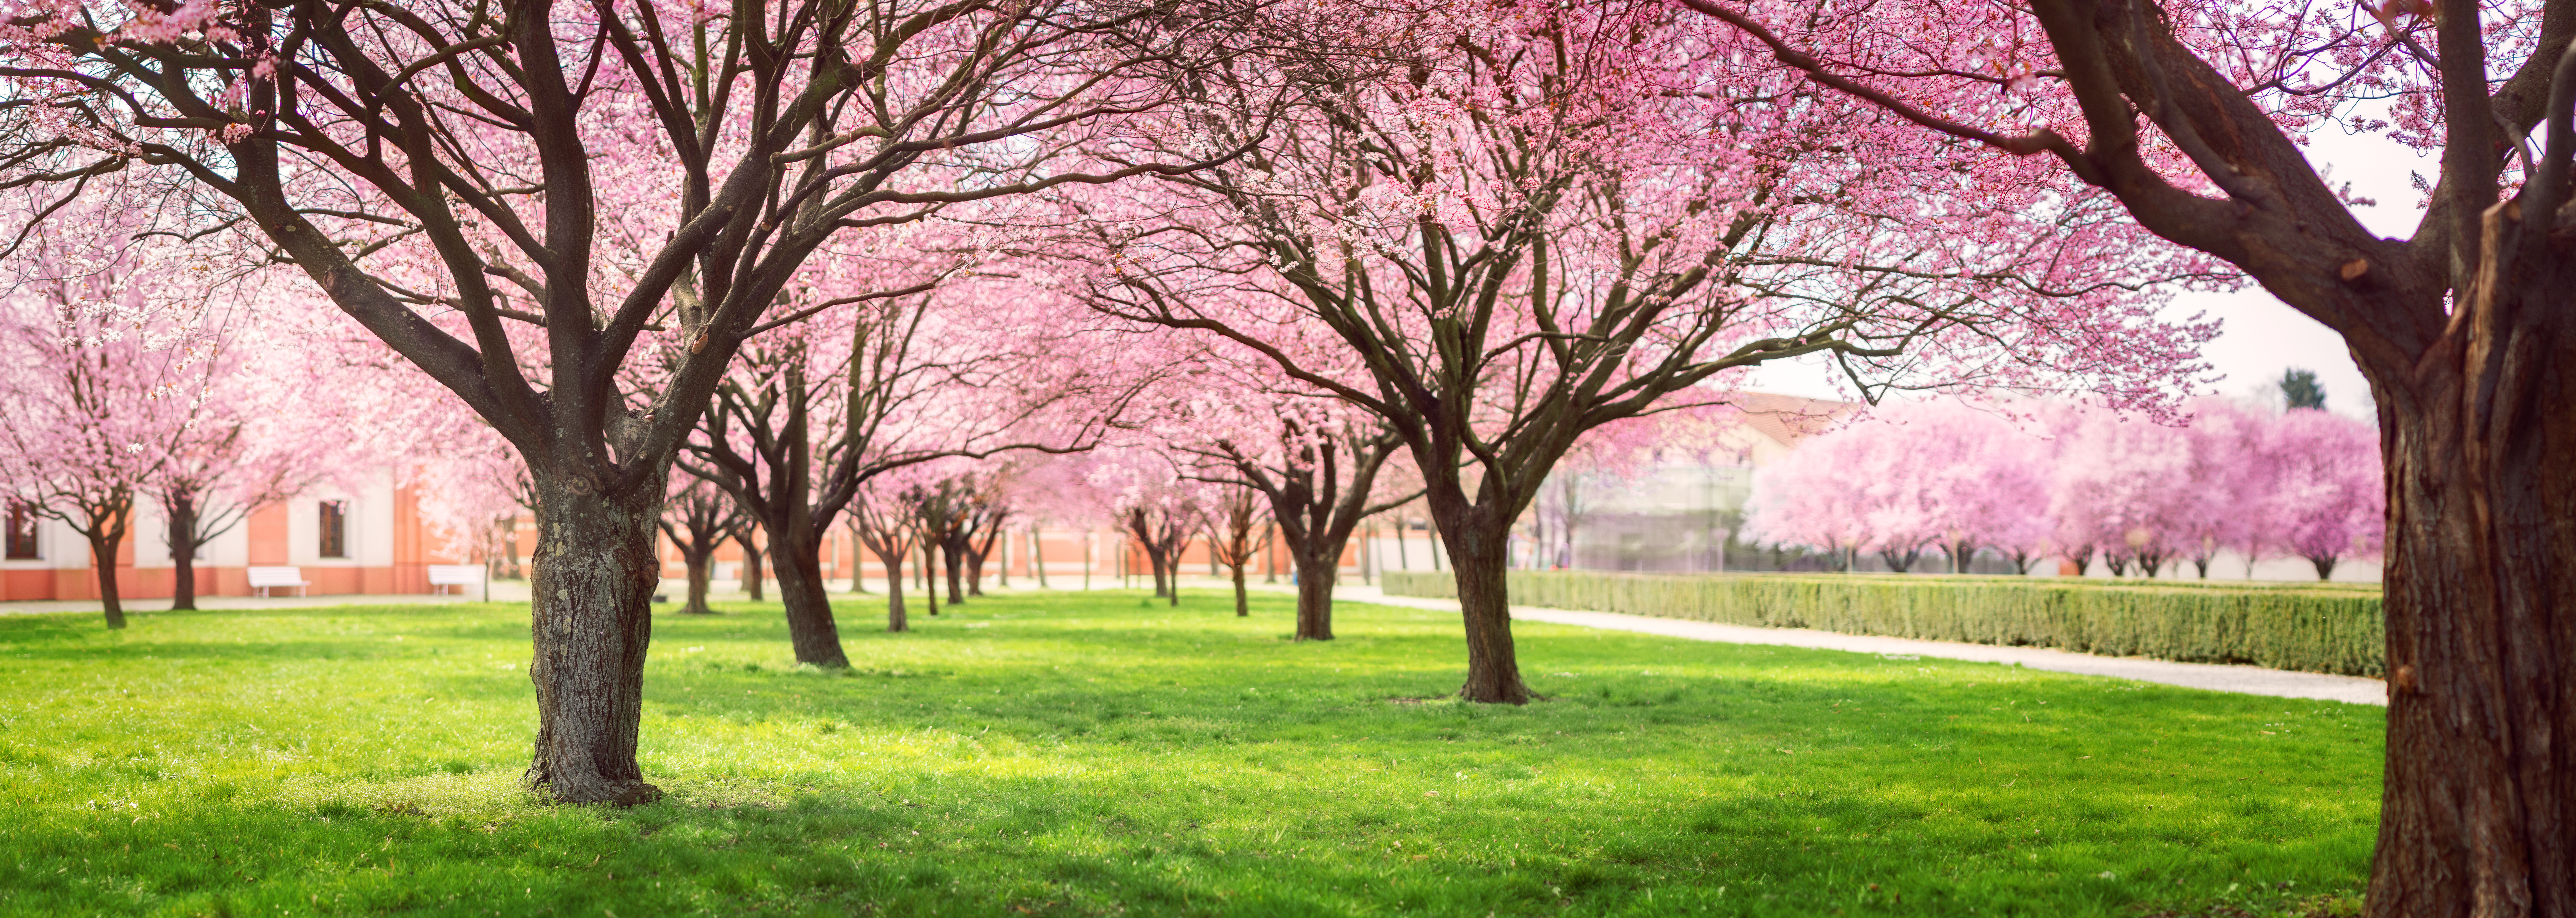 Panorama of Cherry blossom trees Alley in garden on a fresh green lawn at sunset